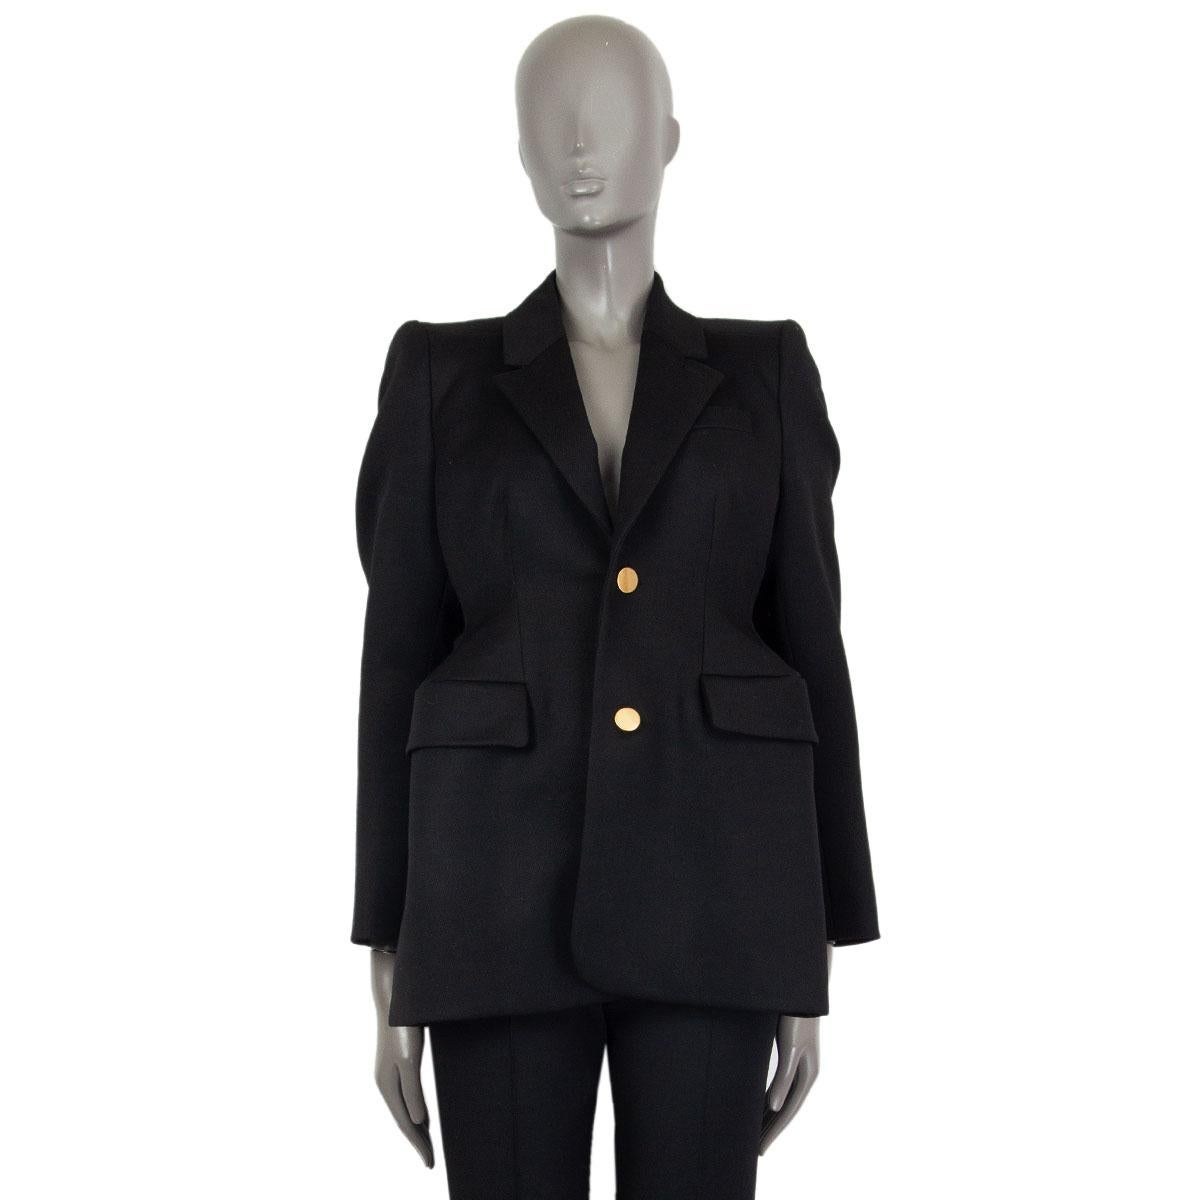 authentic Balenciaga single breasted hourglass blazer in black wool (100%) with padded shoulders and structured hips. Closes with two buttons on the front, has flap pockets and gold-tone metal buttons. Lined in black cupro (100%). Has been worn and